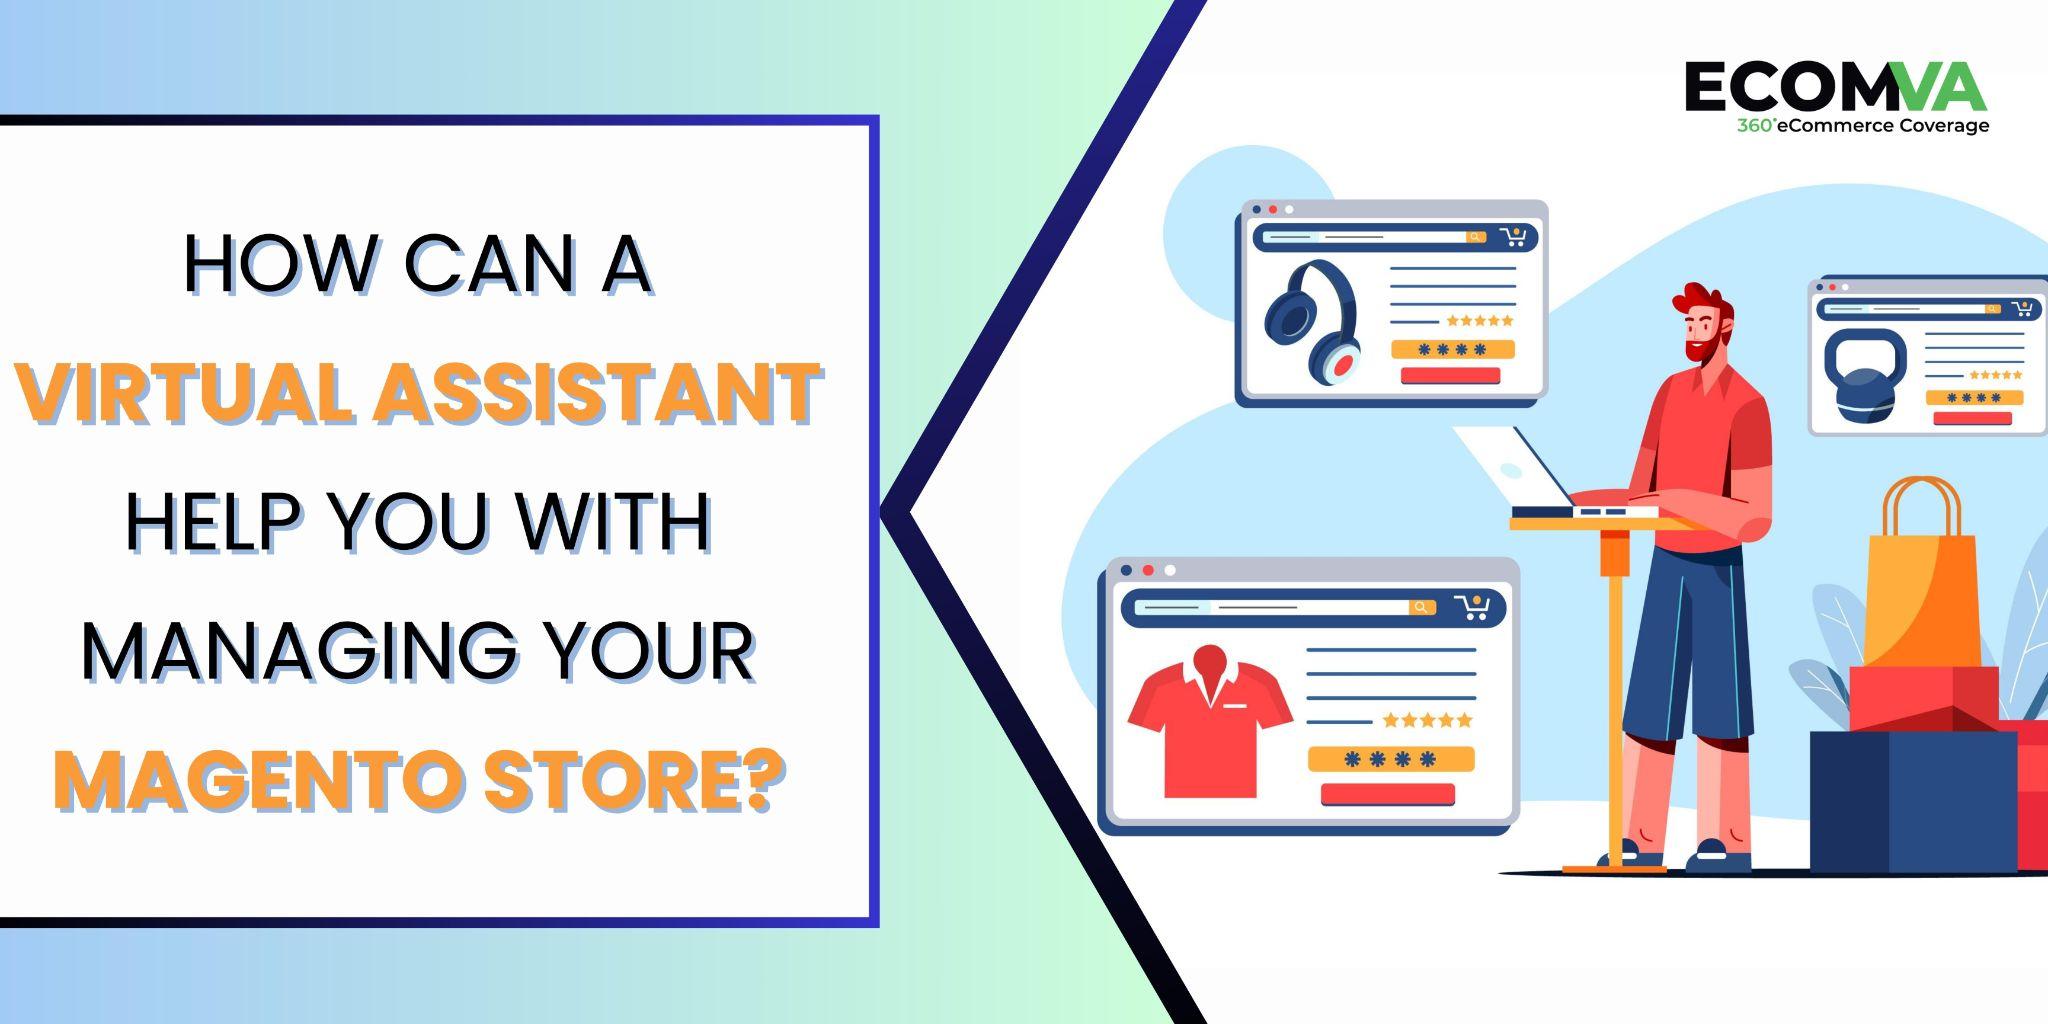 How can a Virtual Assistant Help You With Managing Your Magento Store?